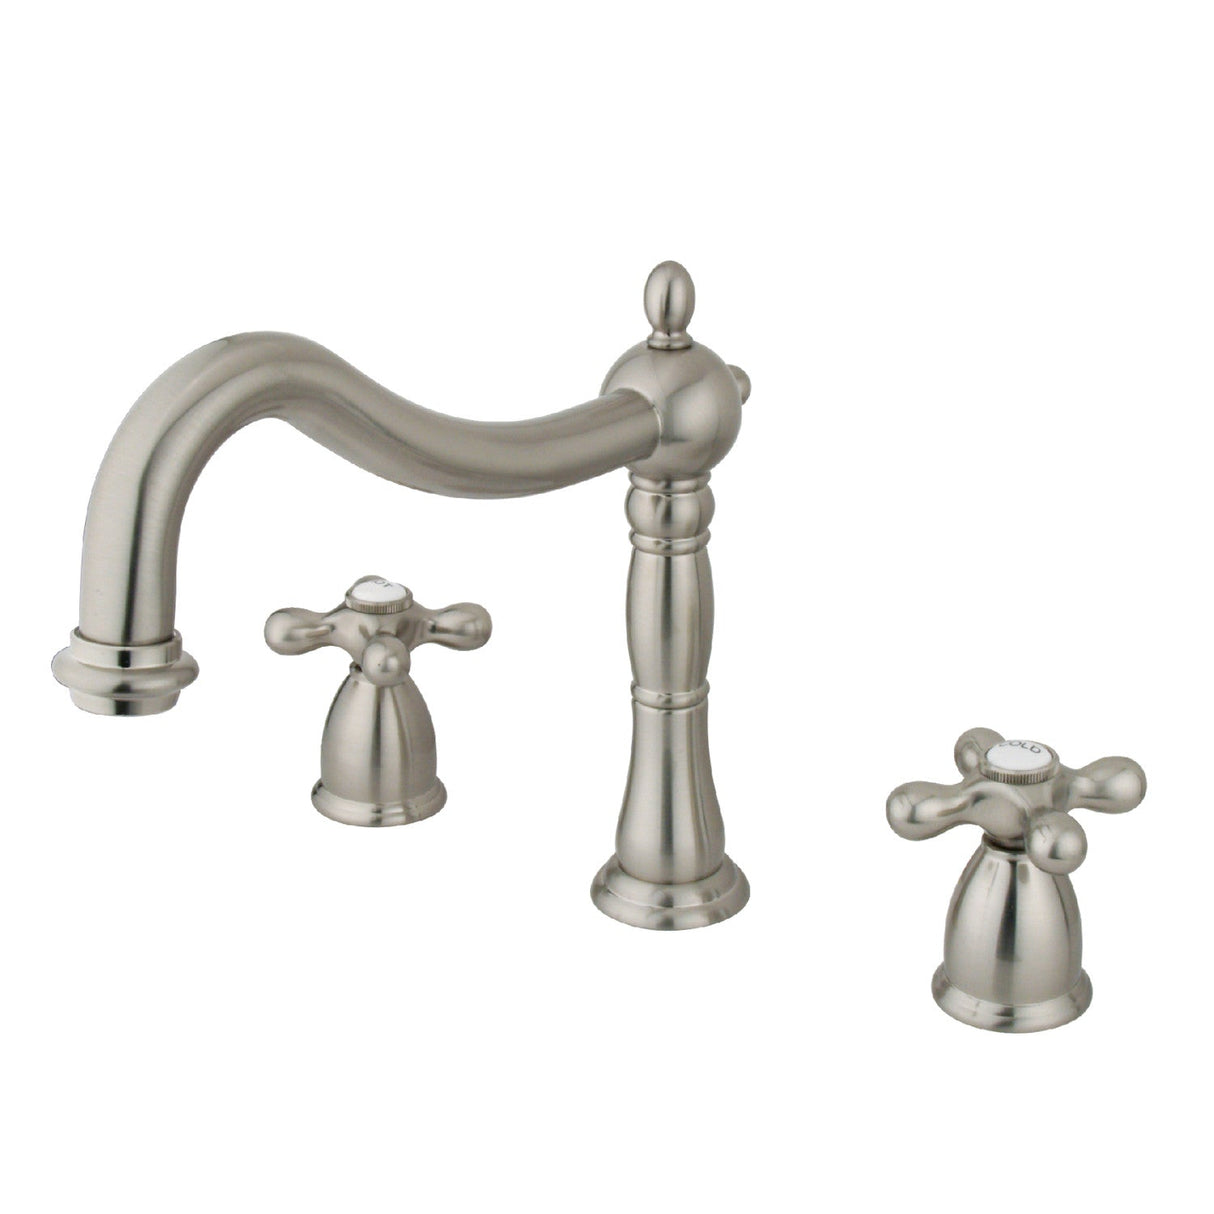 Heritage KS1348AX Two-Handle 3-Hole Deck Mount Roman Tub Faucet, Brushed Nickel